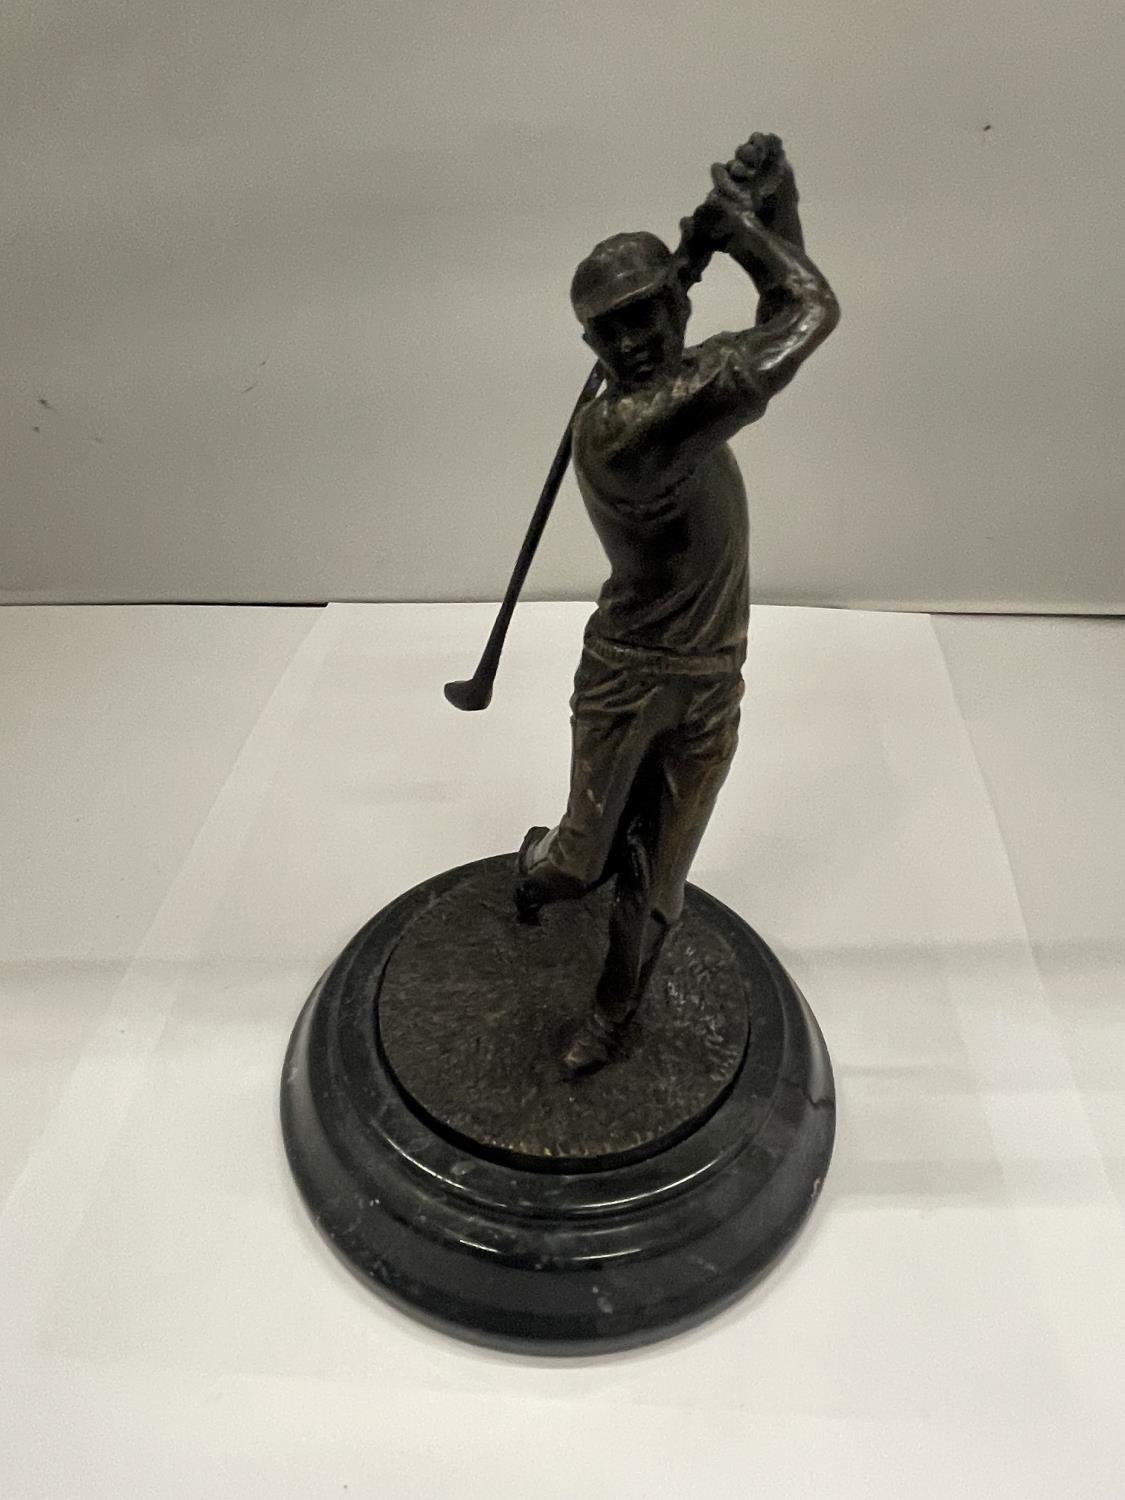 A BRONZE EFFECT EROTIC FIGURES SIGNED PLUS A BRONZE EFFECT GOLFER - Image 3 of 3